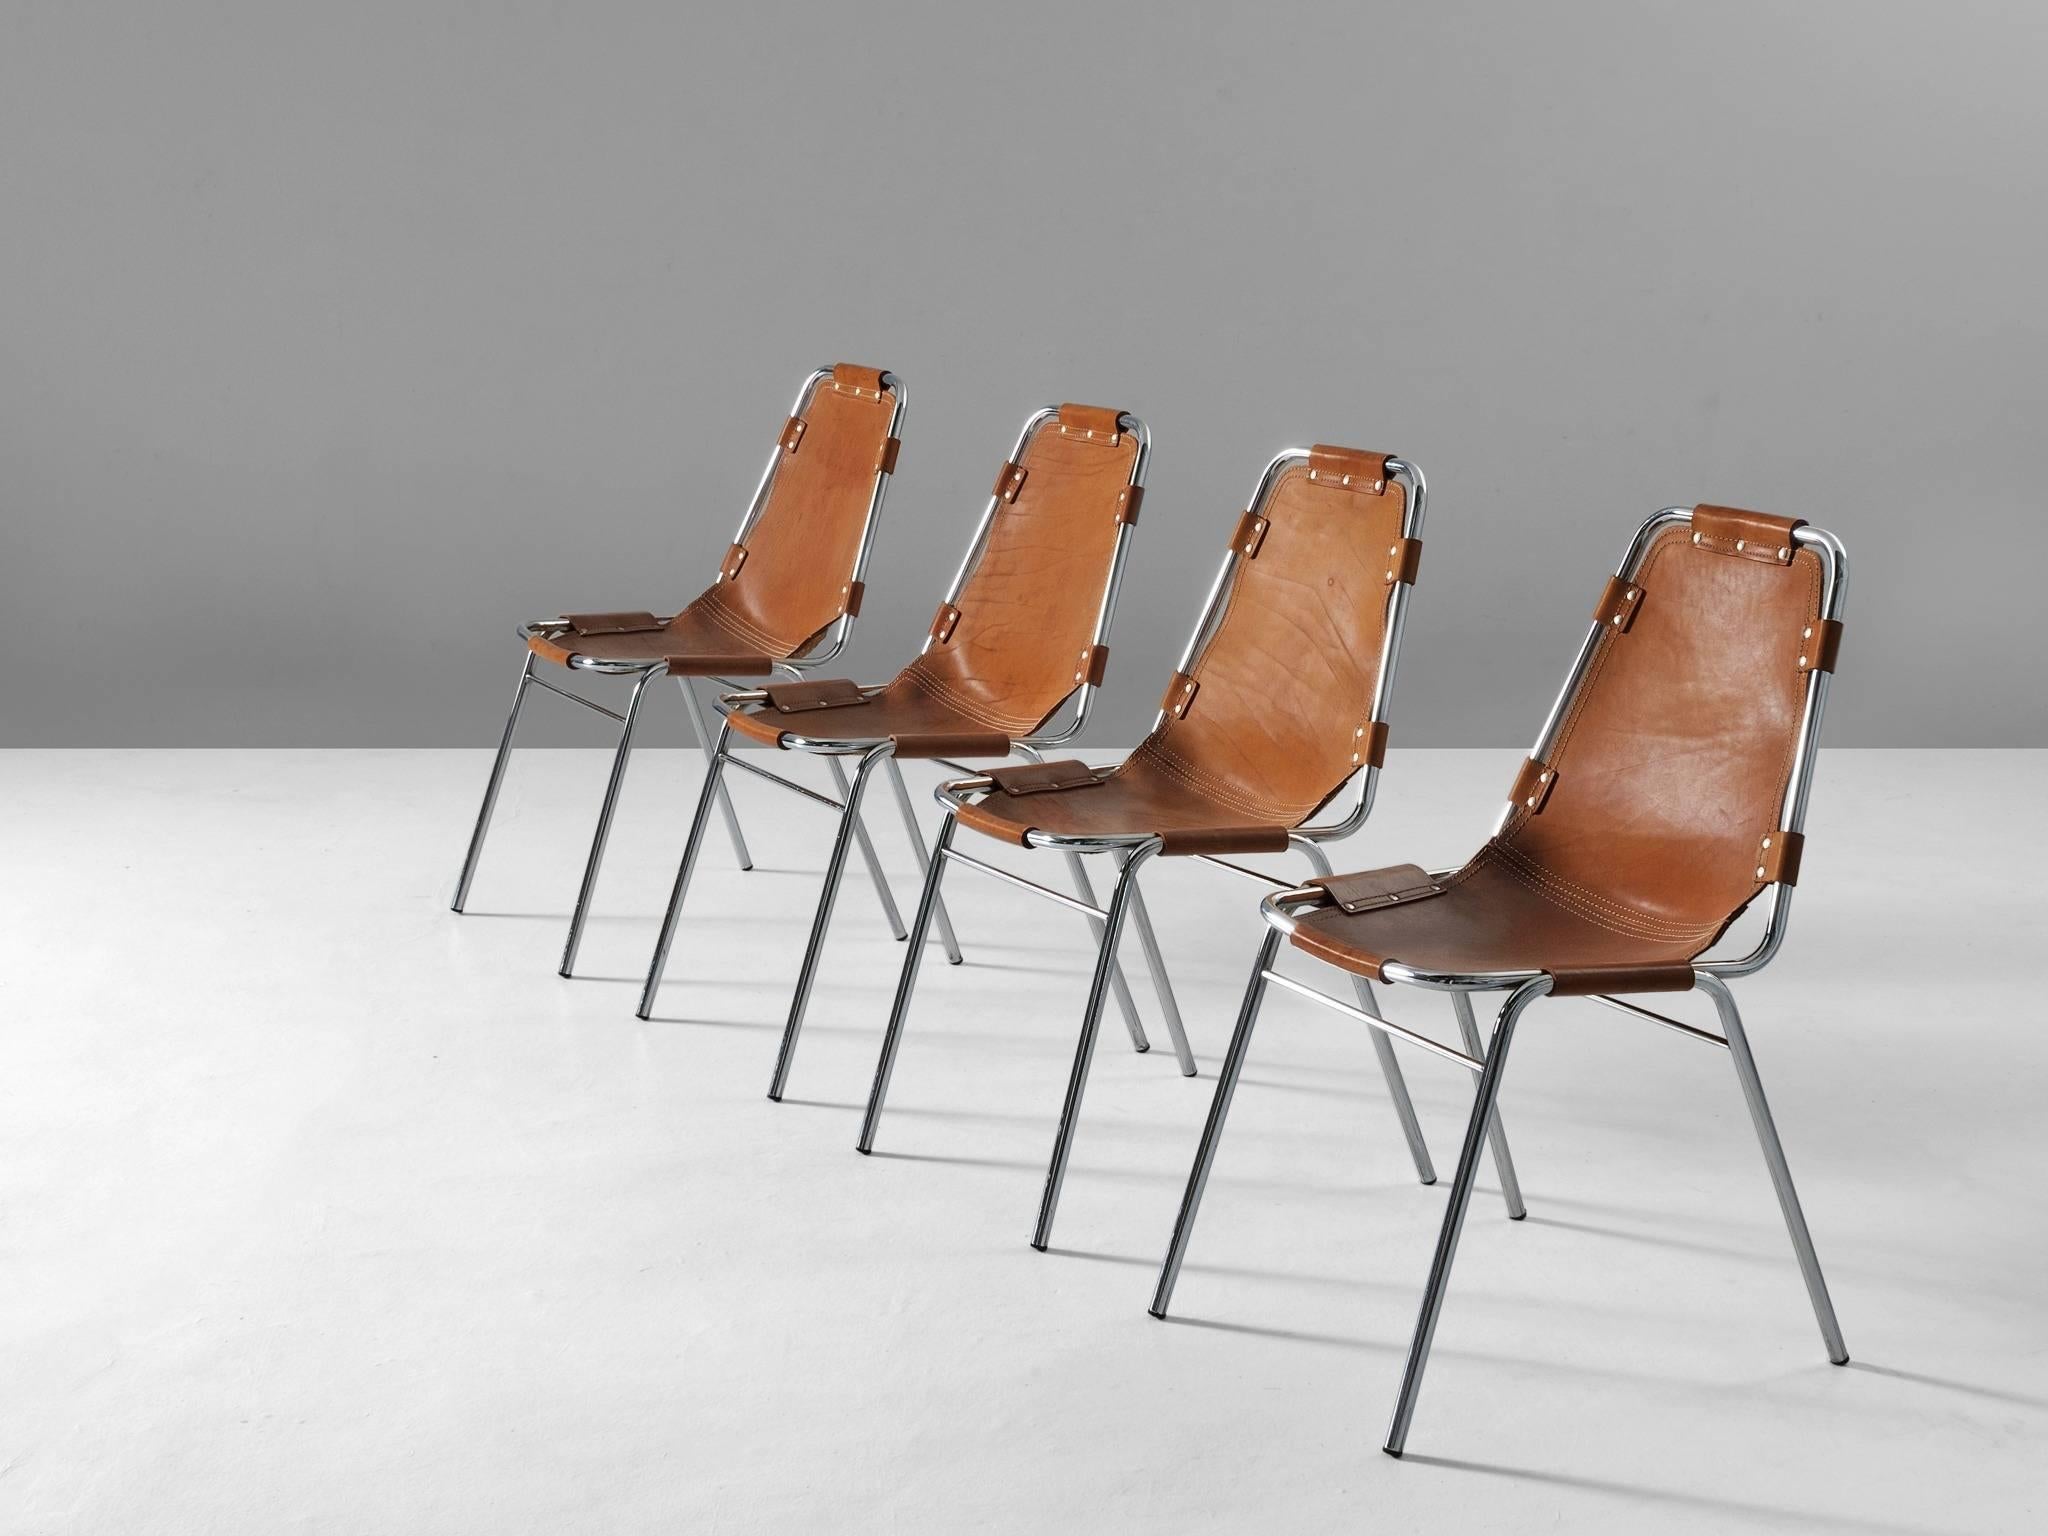 Set of four chairs, in steel and leather, France, circa 1970s.

Set of four chairs of the famous model 'Les Arcs' . The simplistic design consist of a tubular steel frame with a seating of thick cognac saddle leather. The natural leather makes a